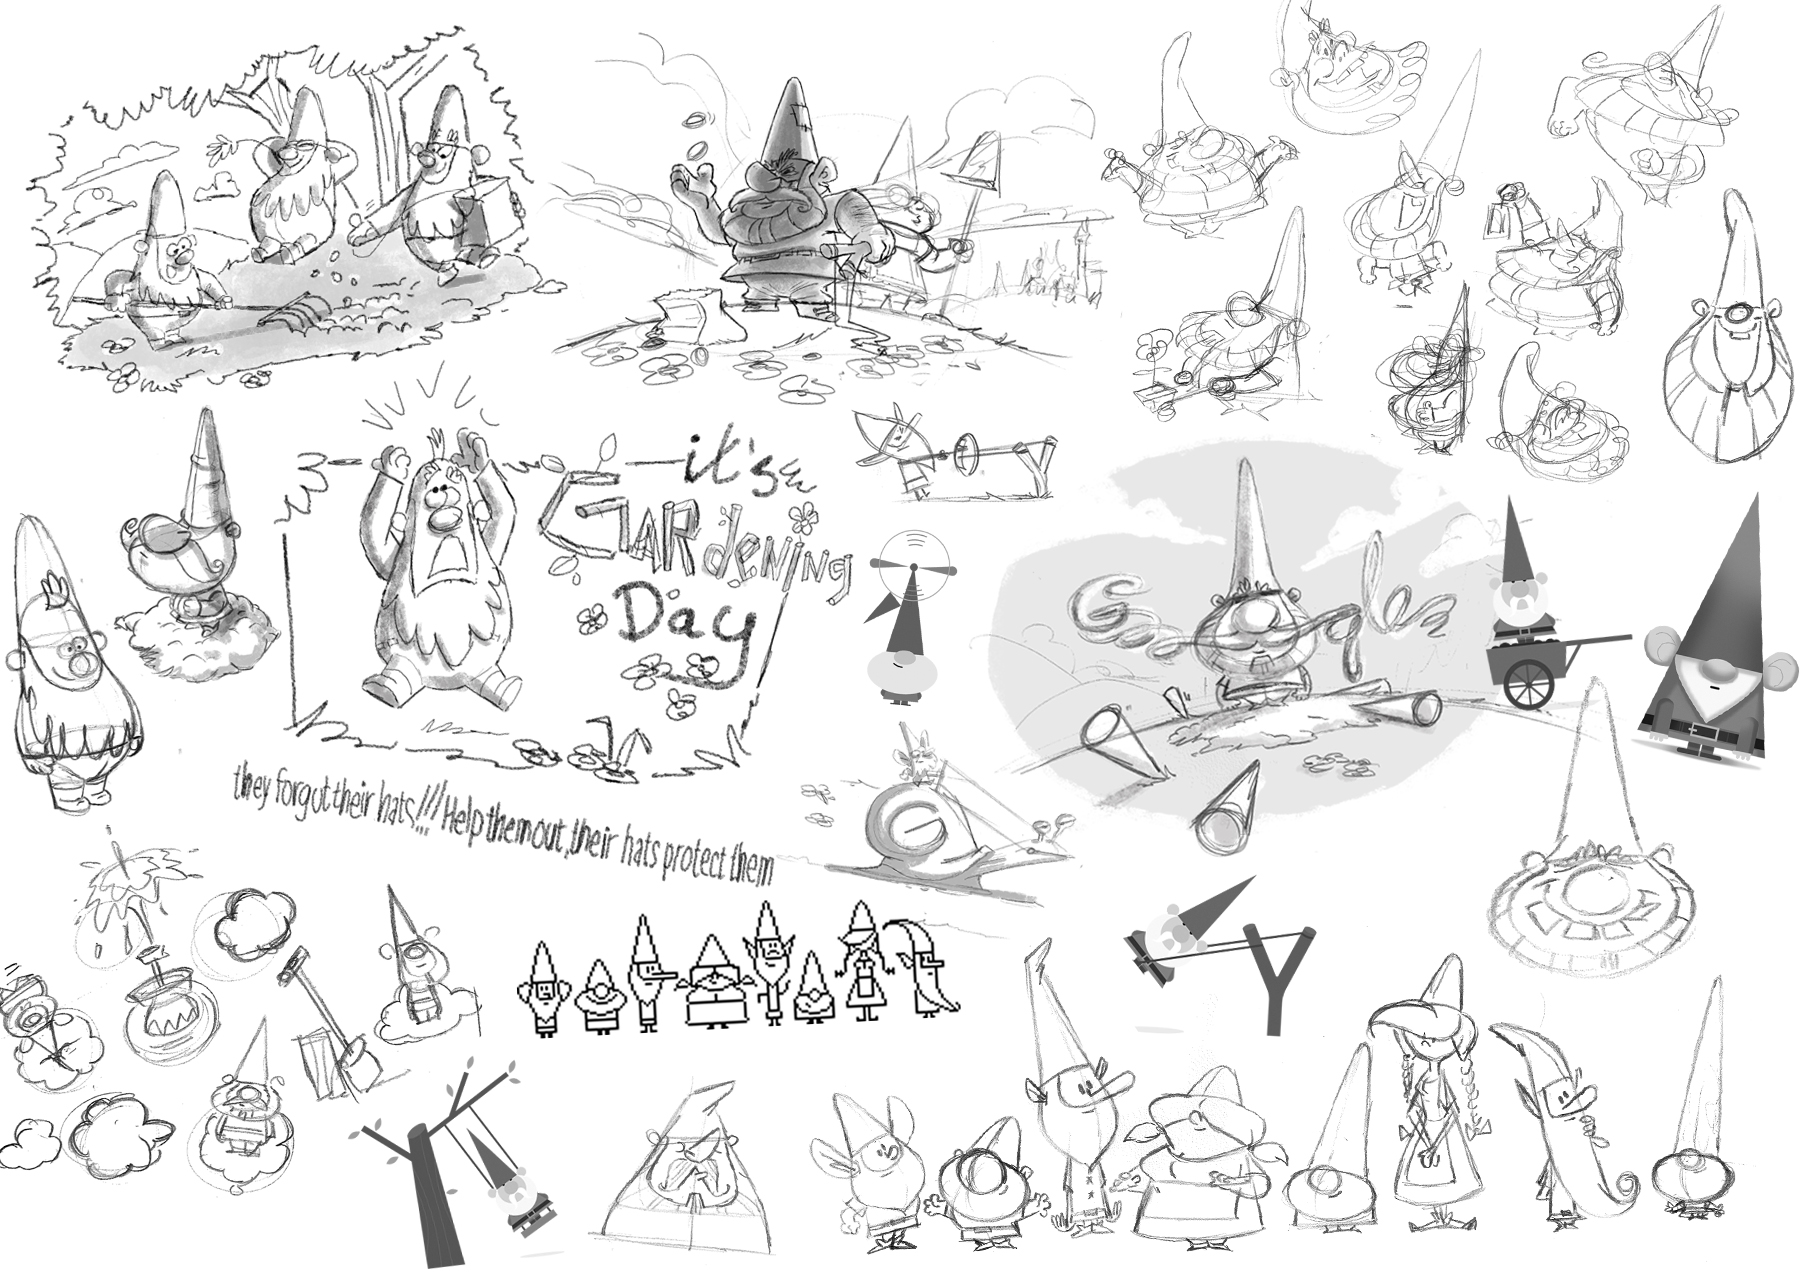 Black and white sketches of various garden gnomes and design styles